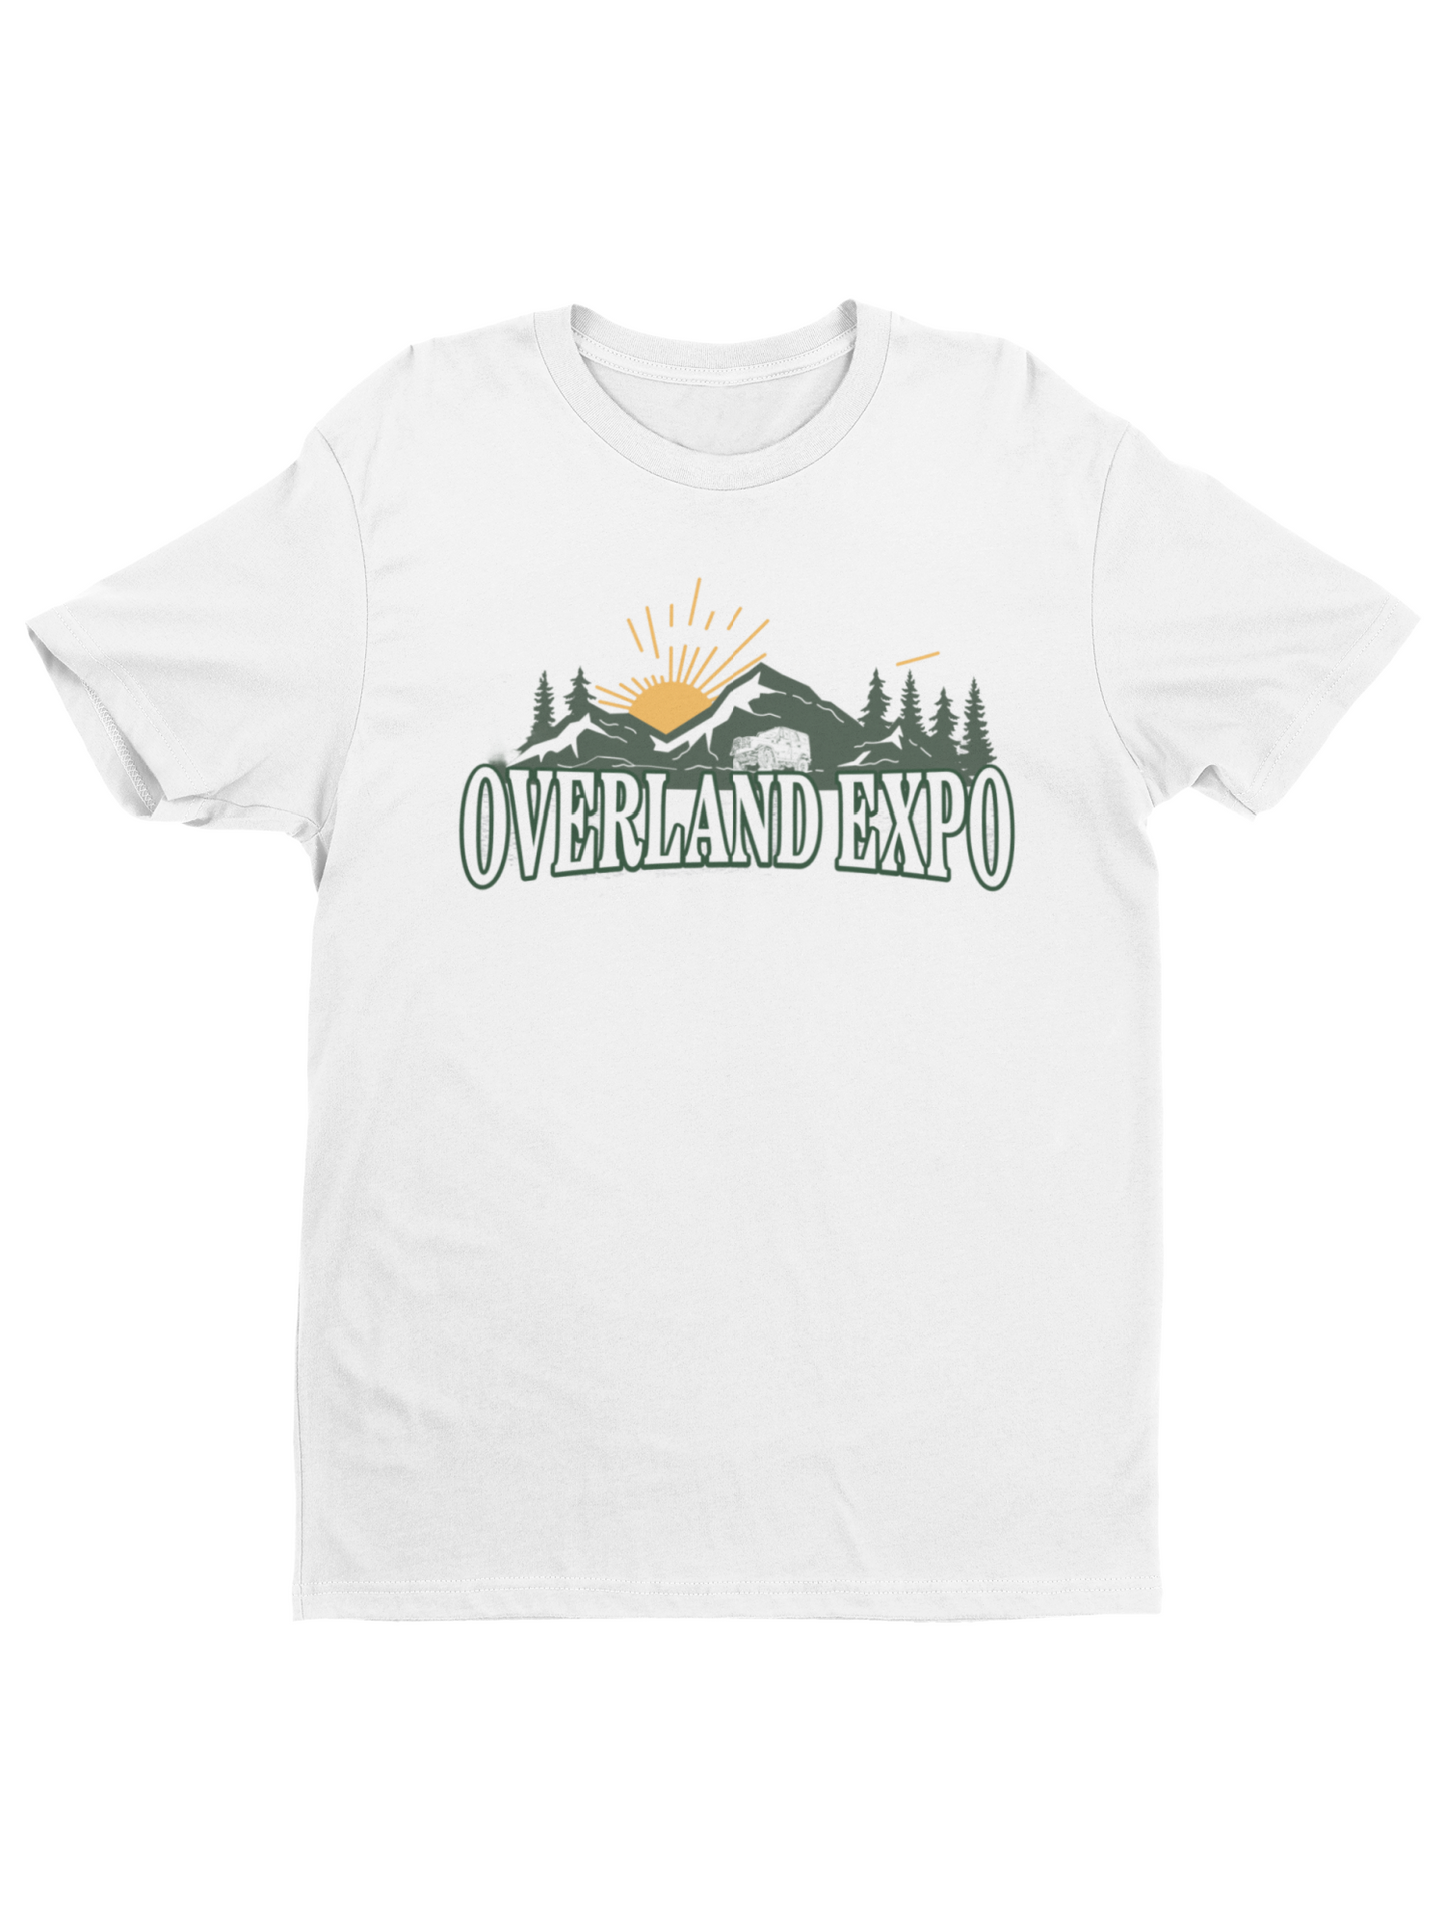 OE - Mountains Limited Tee - Heathered Grey or White